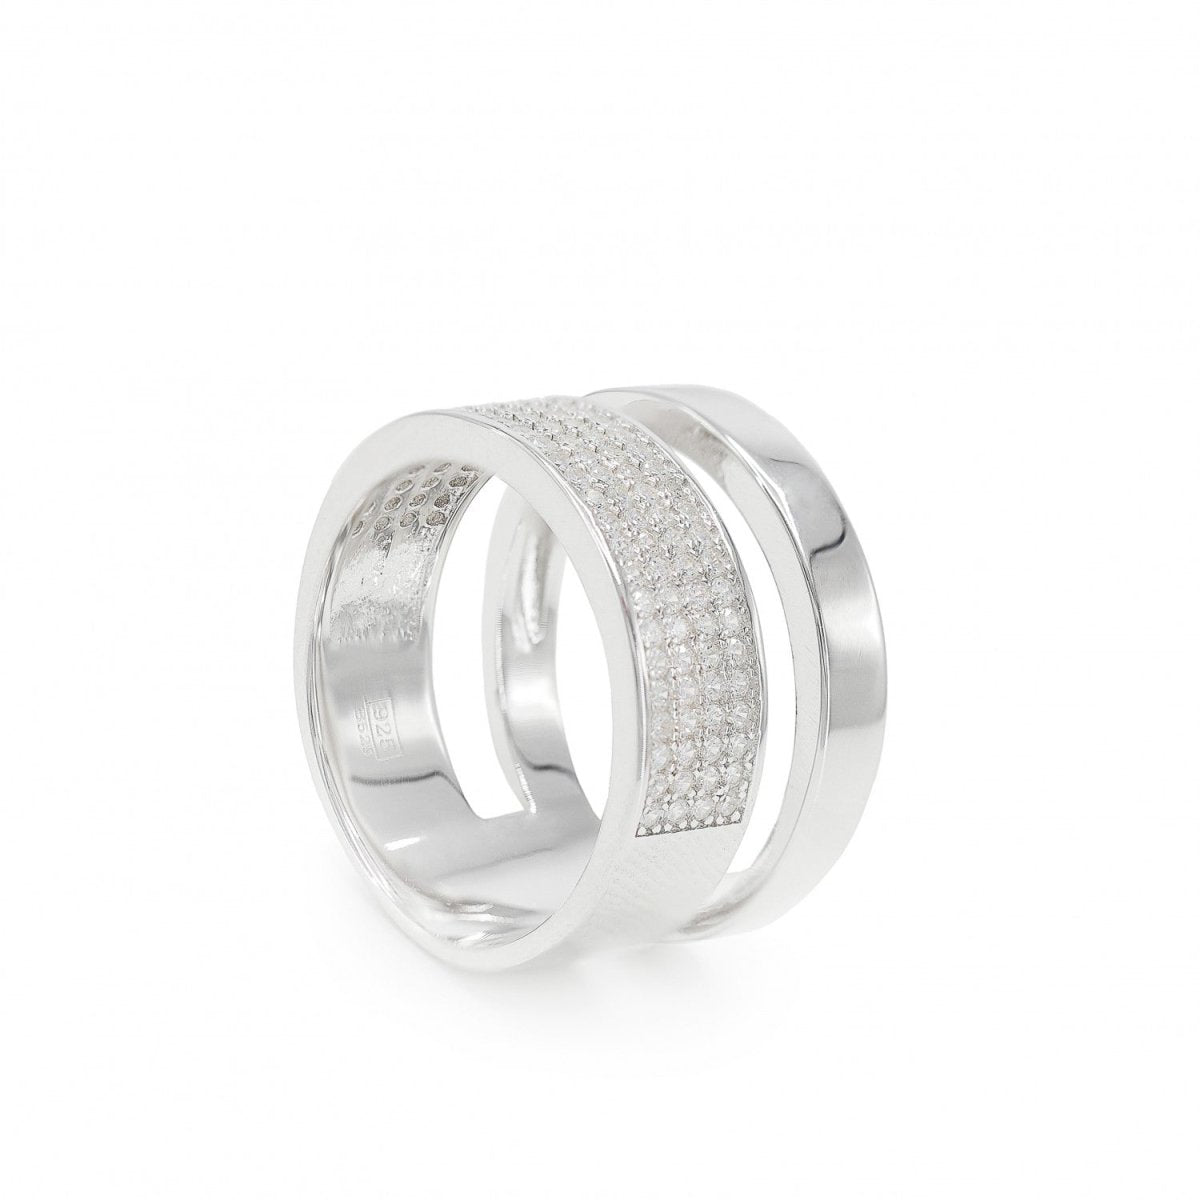 Double wide silver rings with zirconia design - LINEARGENT